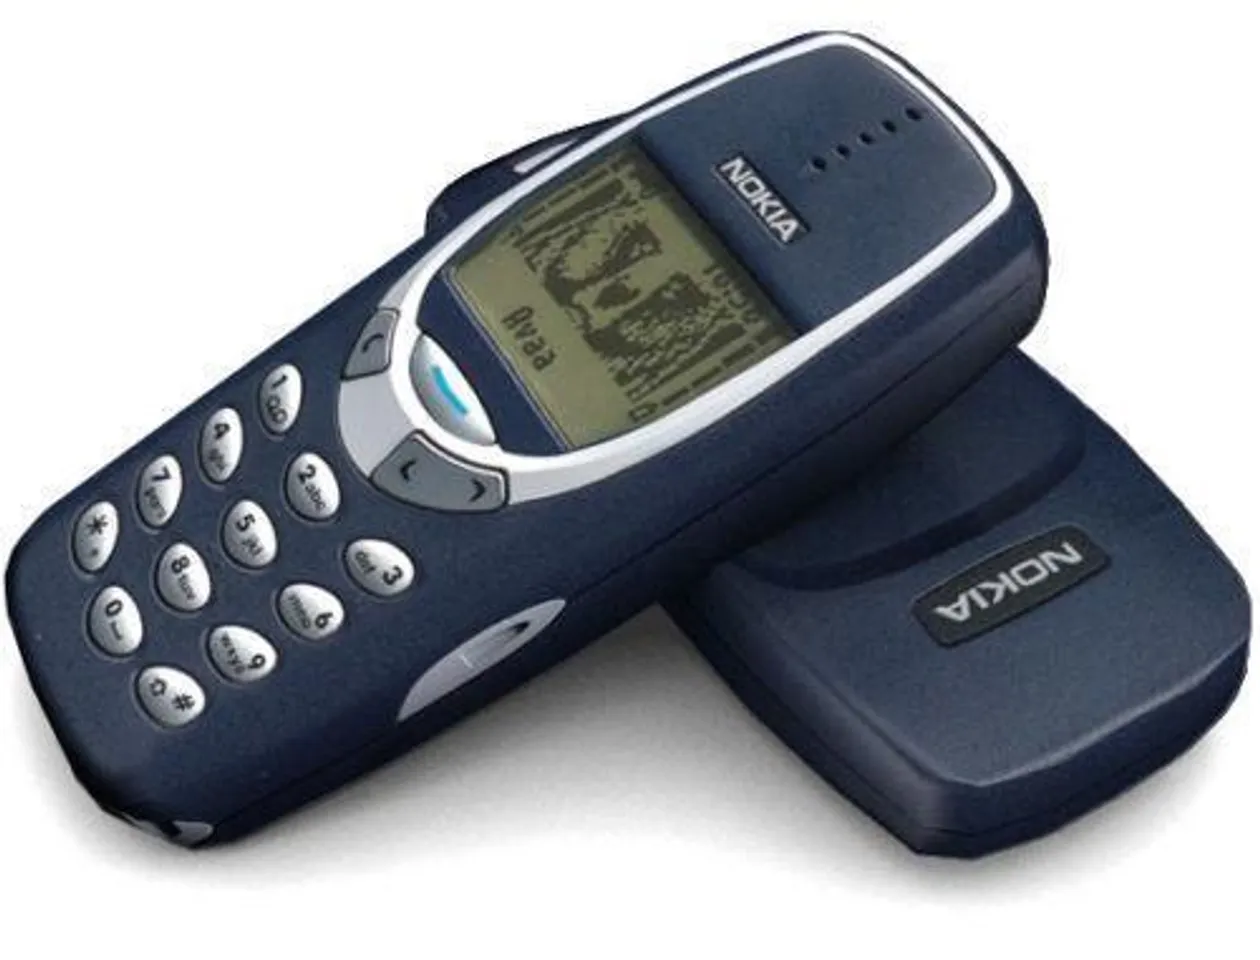 Nokia Set to Launch the Iconic 3310 Handset